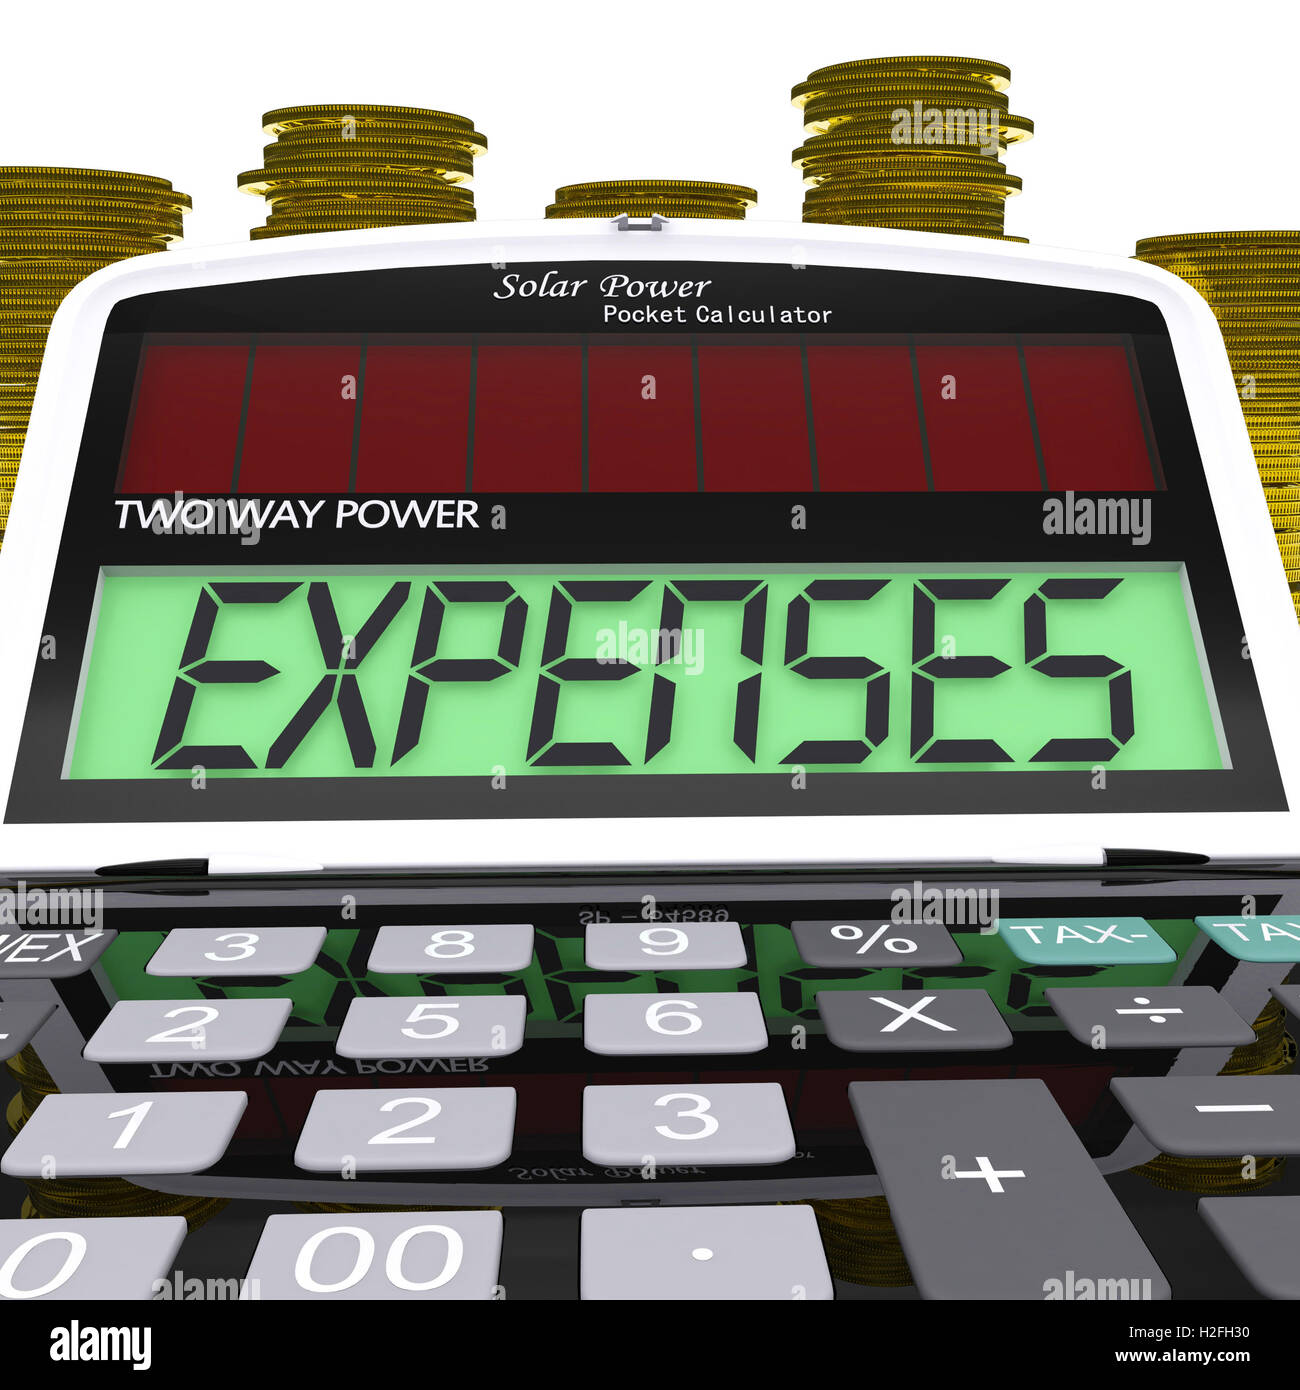 Expenses Calculator Shows Business Expenditure And Bookkeeping Stock Photo